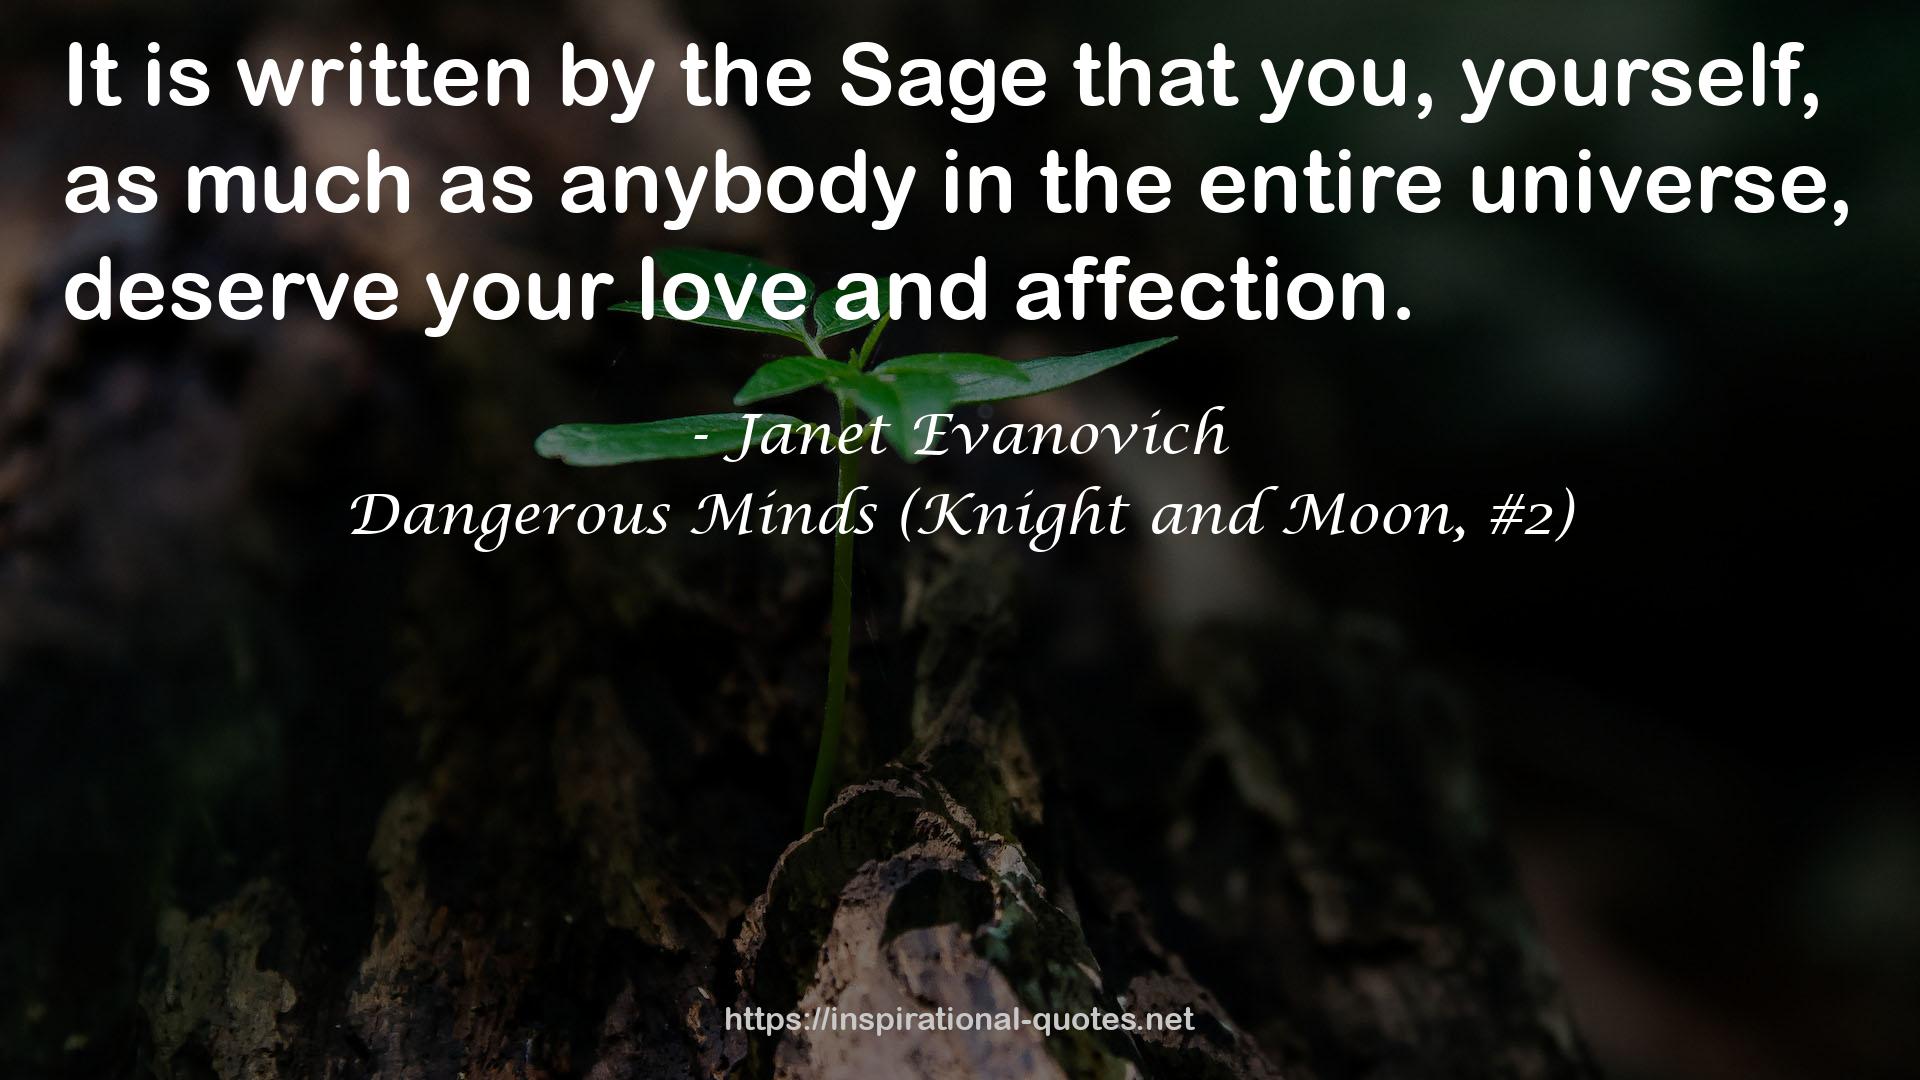 Dangerous Minds (Knight and Moon, #2) QUOTES